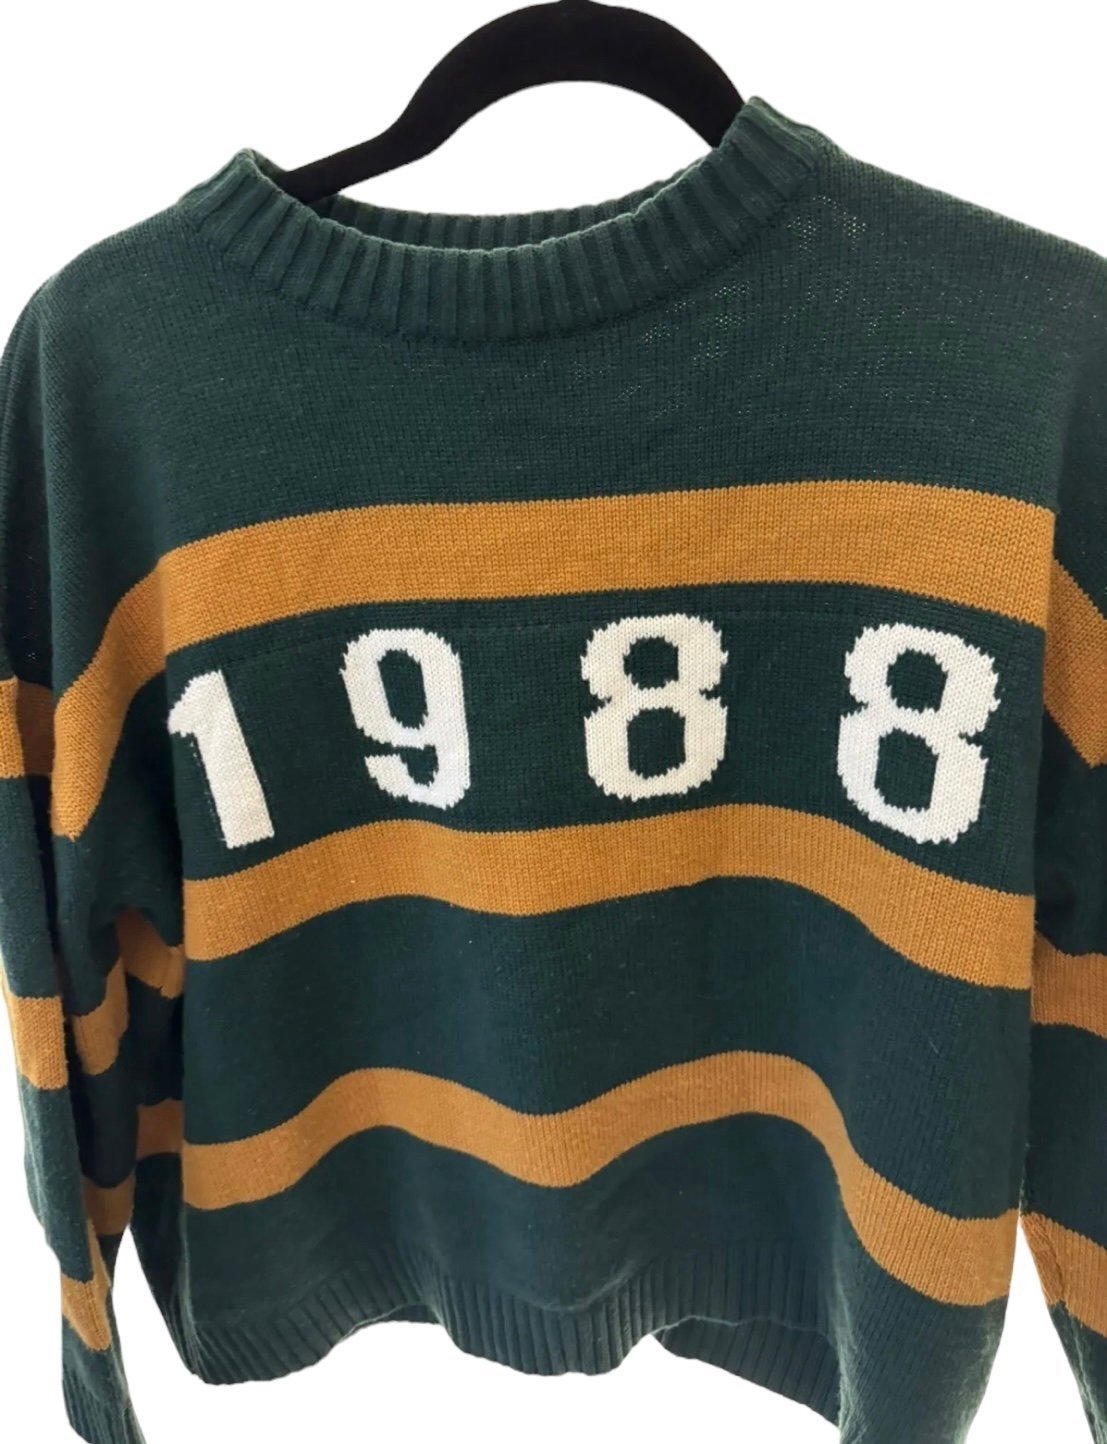 1988 Vintage Style Sweater Green And Yellow Small 5pIRos1bC